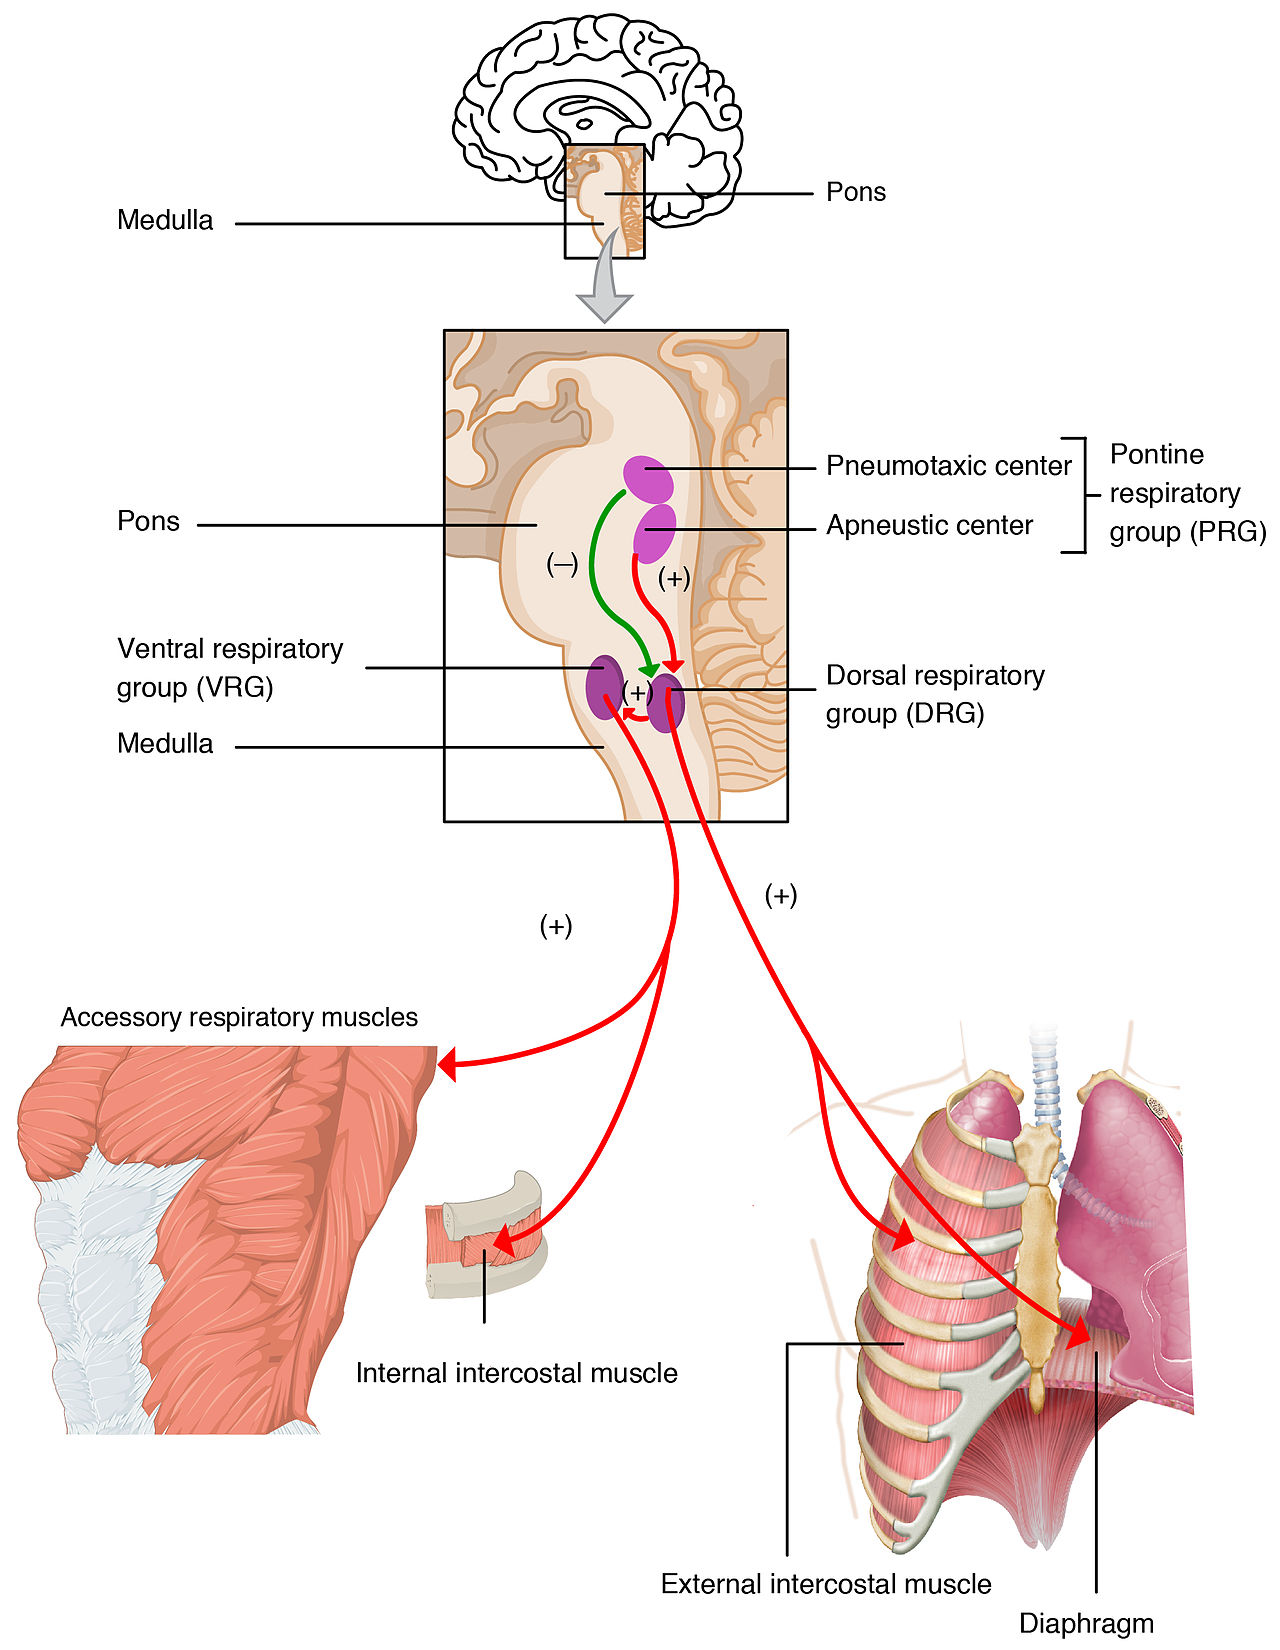 Illustration of the respiratory system and brain stem